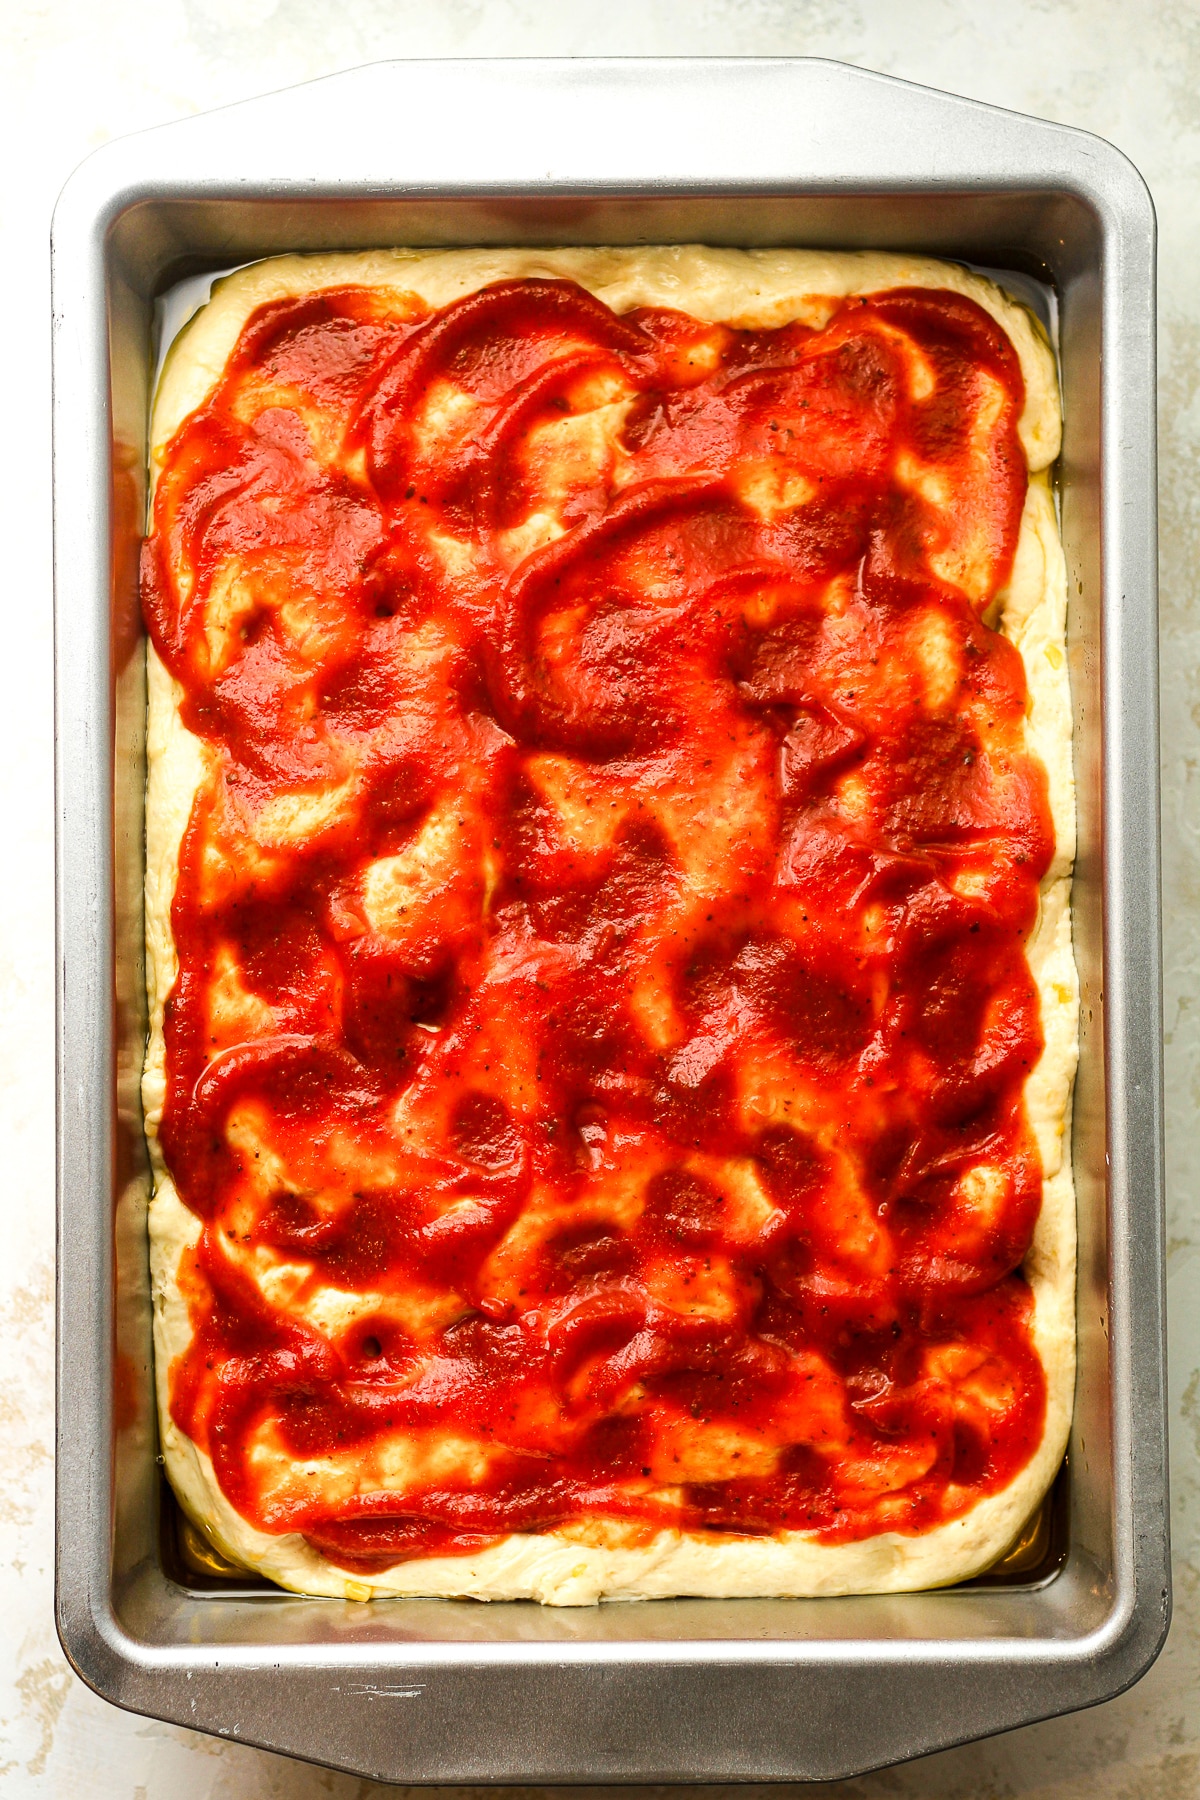 The focaccia dough with pizza sauce on top.